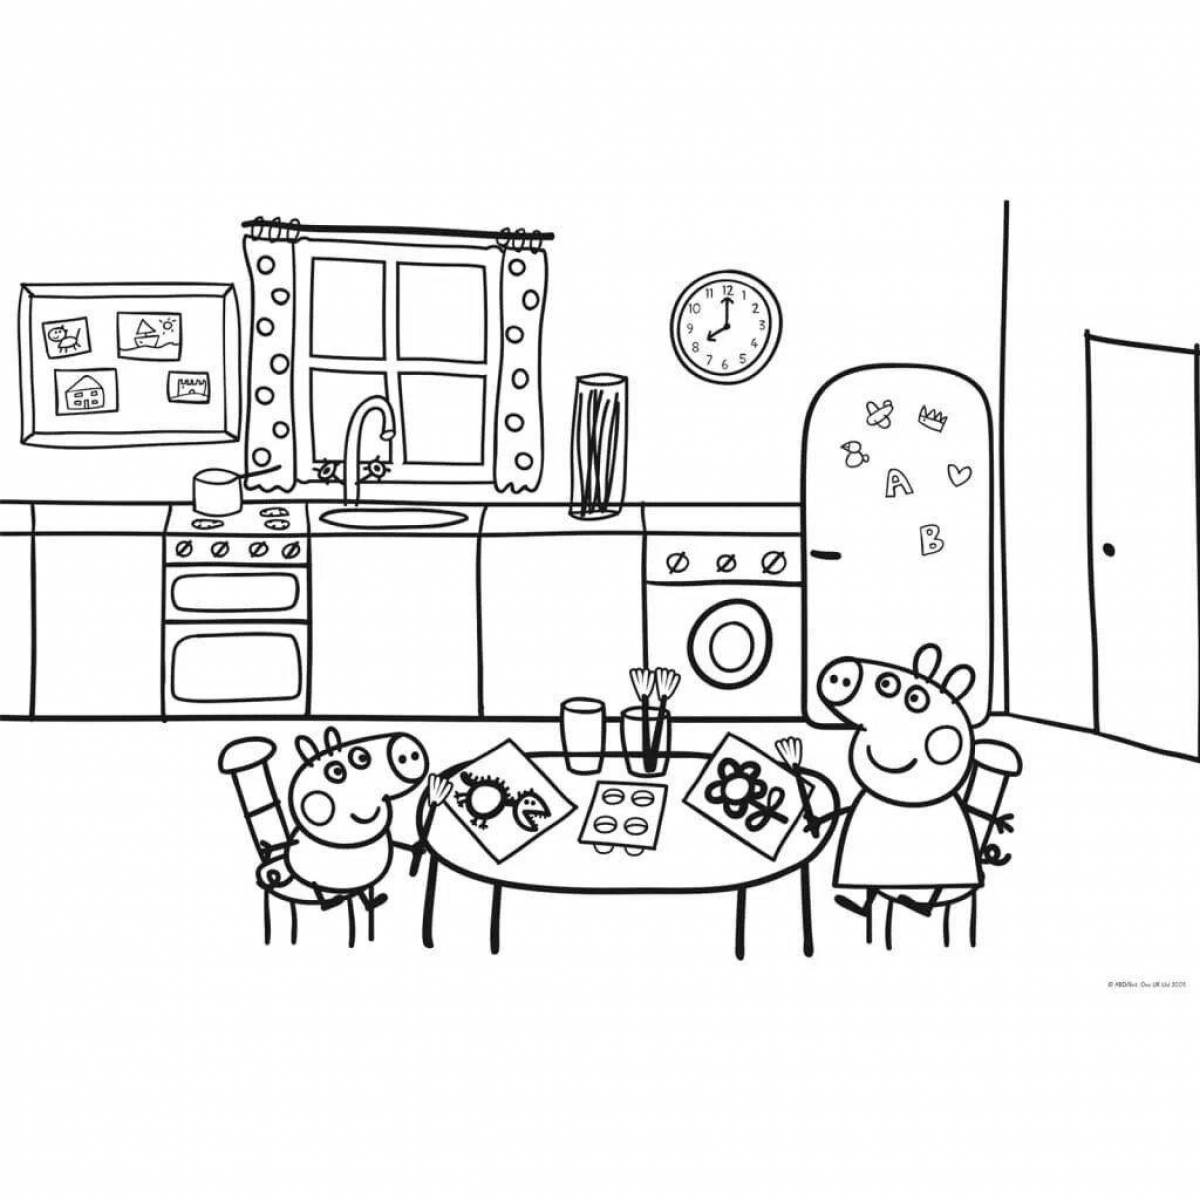 Exciting current side interior coloring page